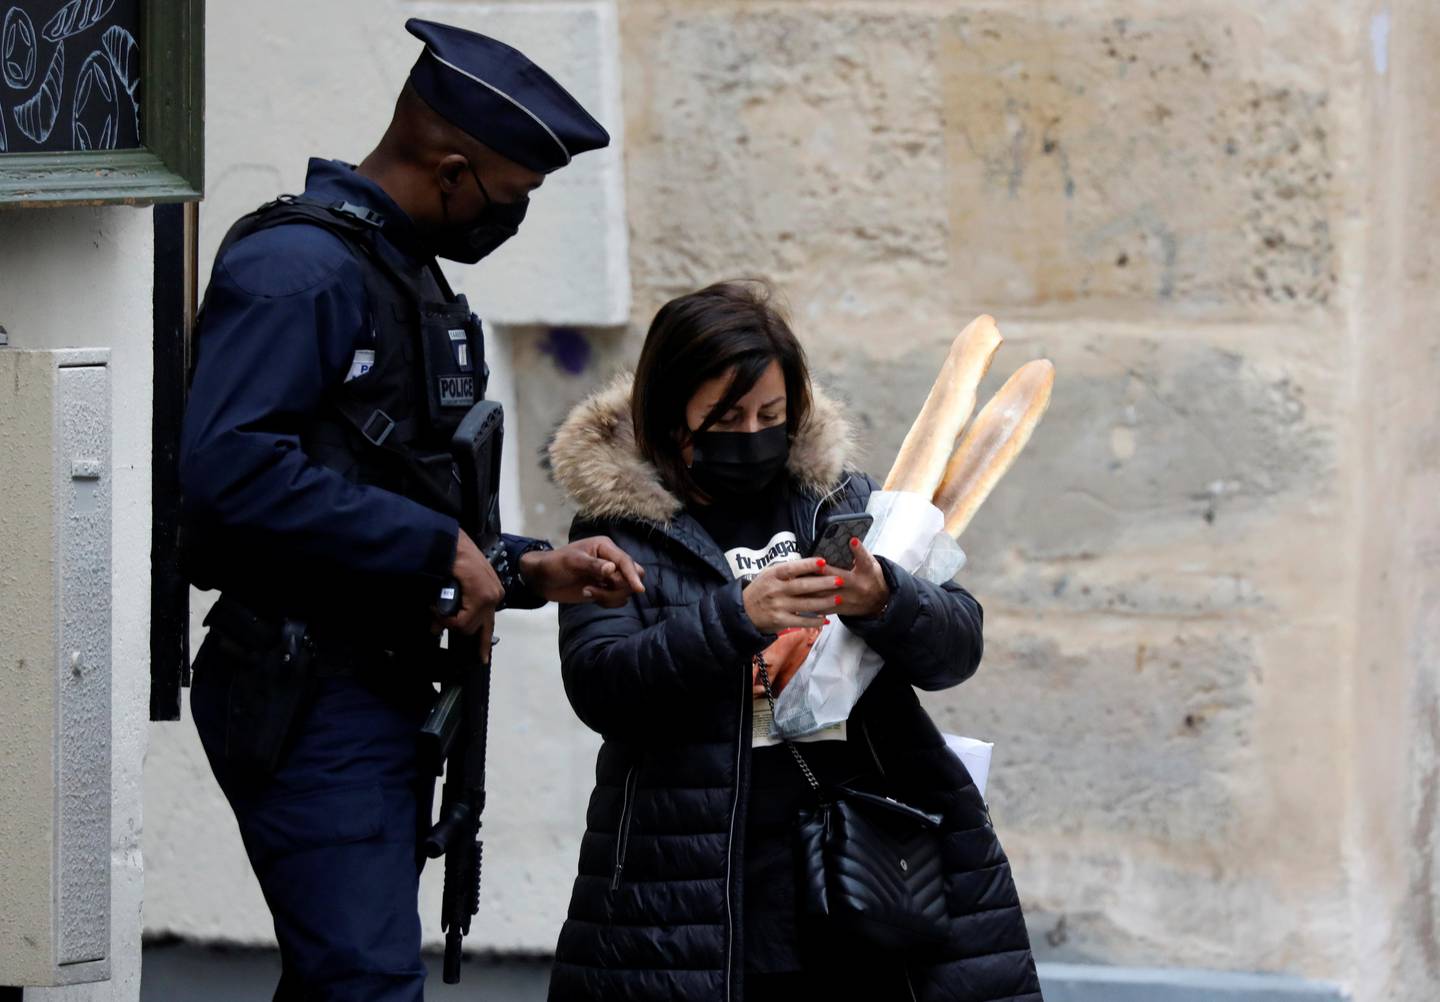 A policeman controls a woman in a street in Paris on the first day of the second national lockdown as part of the COVID-19 measures to fight a second wave of the coronavirus disease (COVID-19), France, October 30, 2020. REUTERS/Charles Platiau